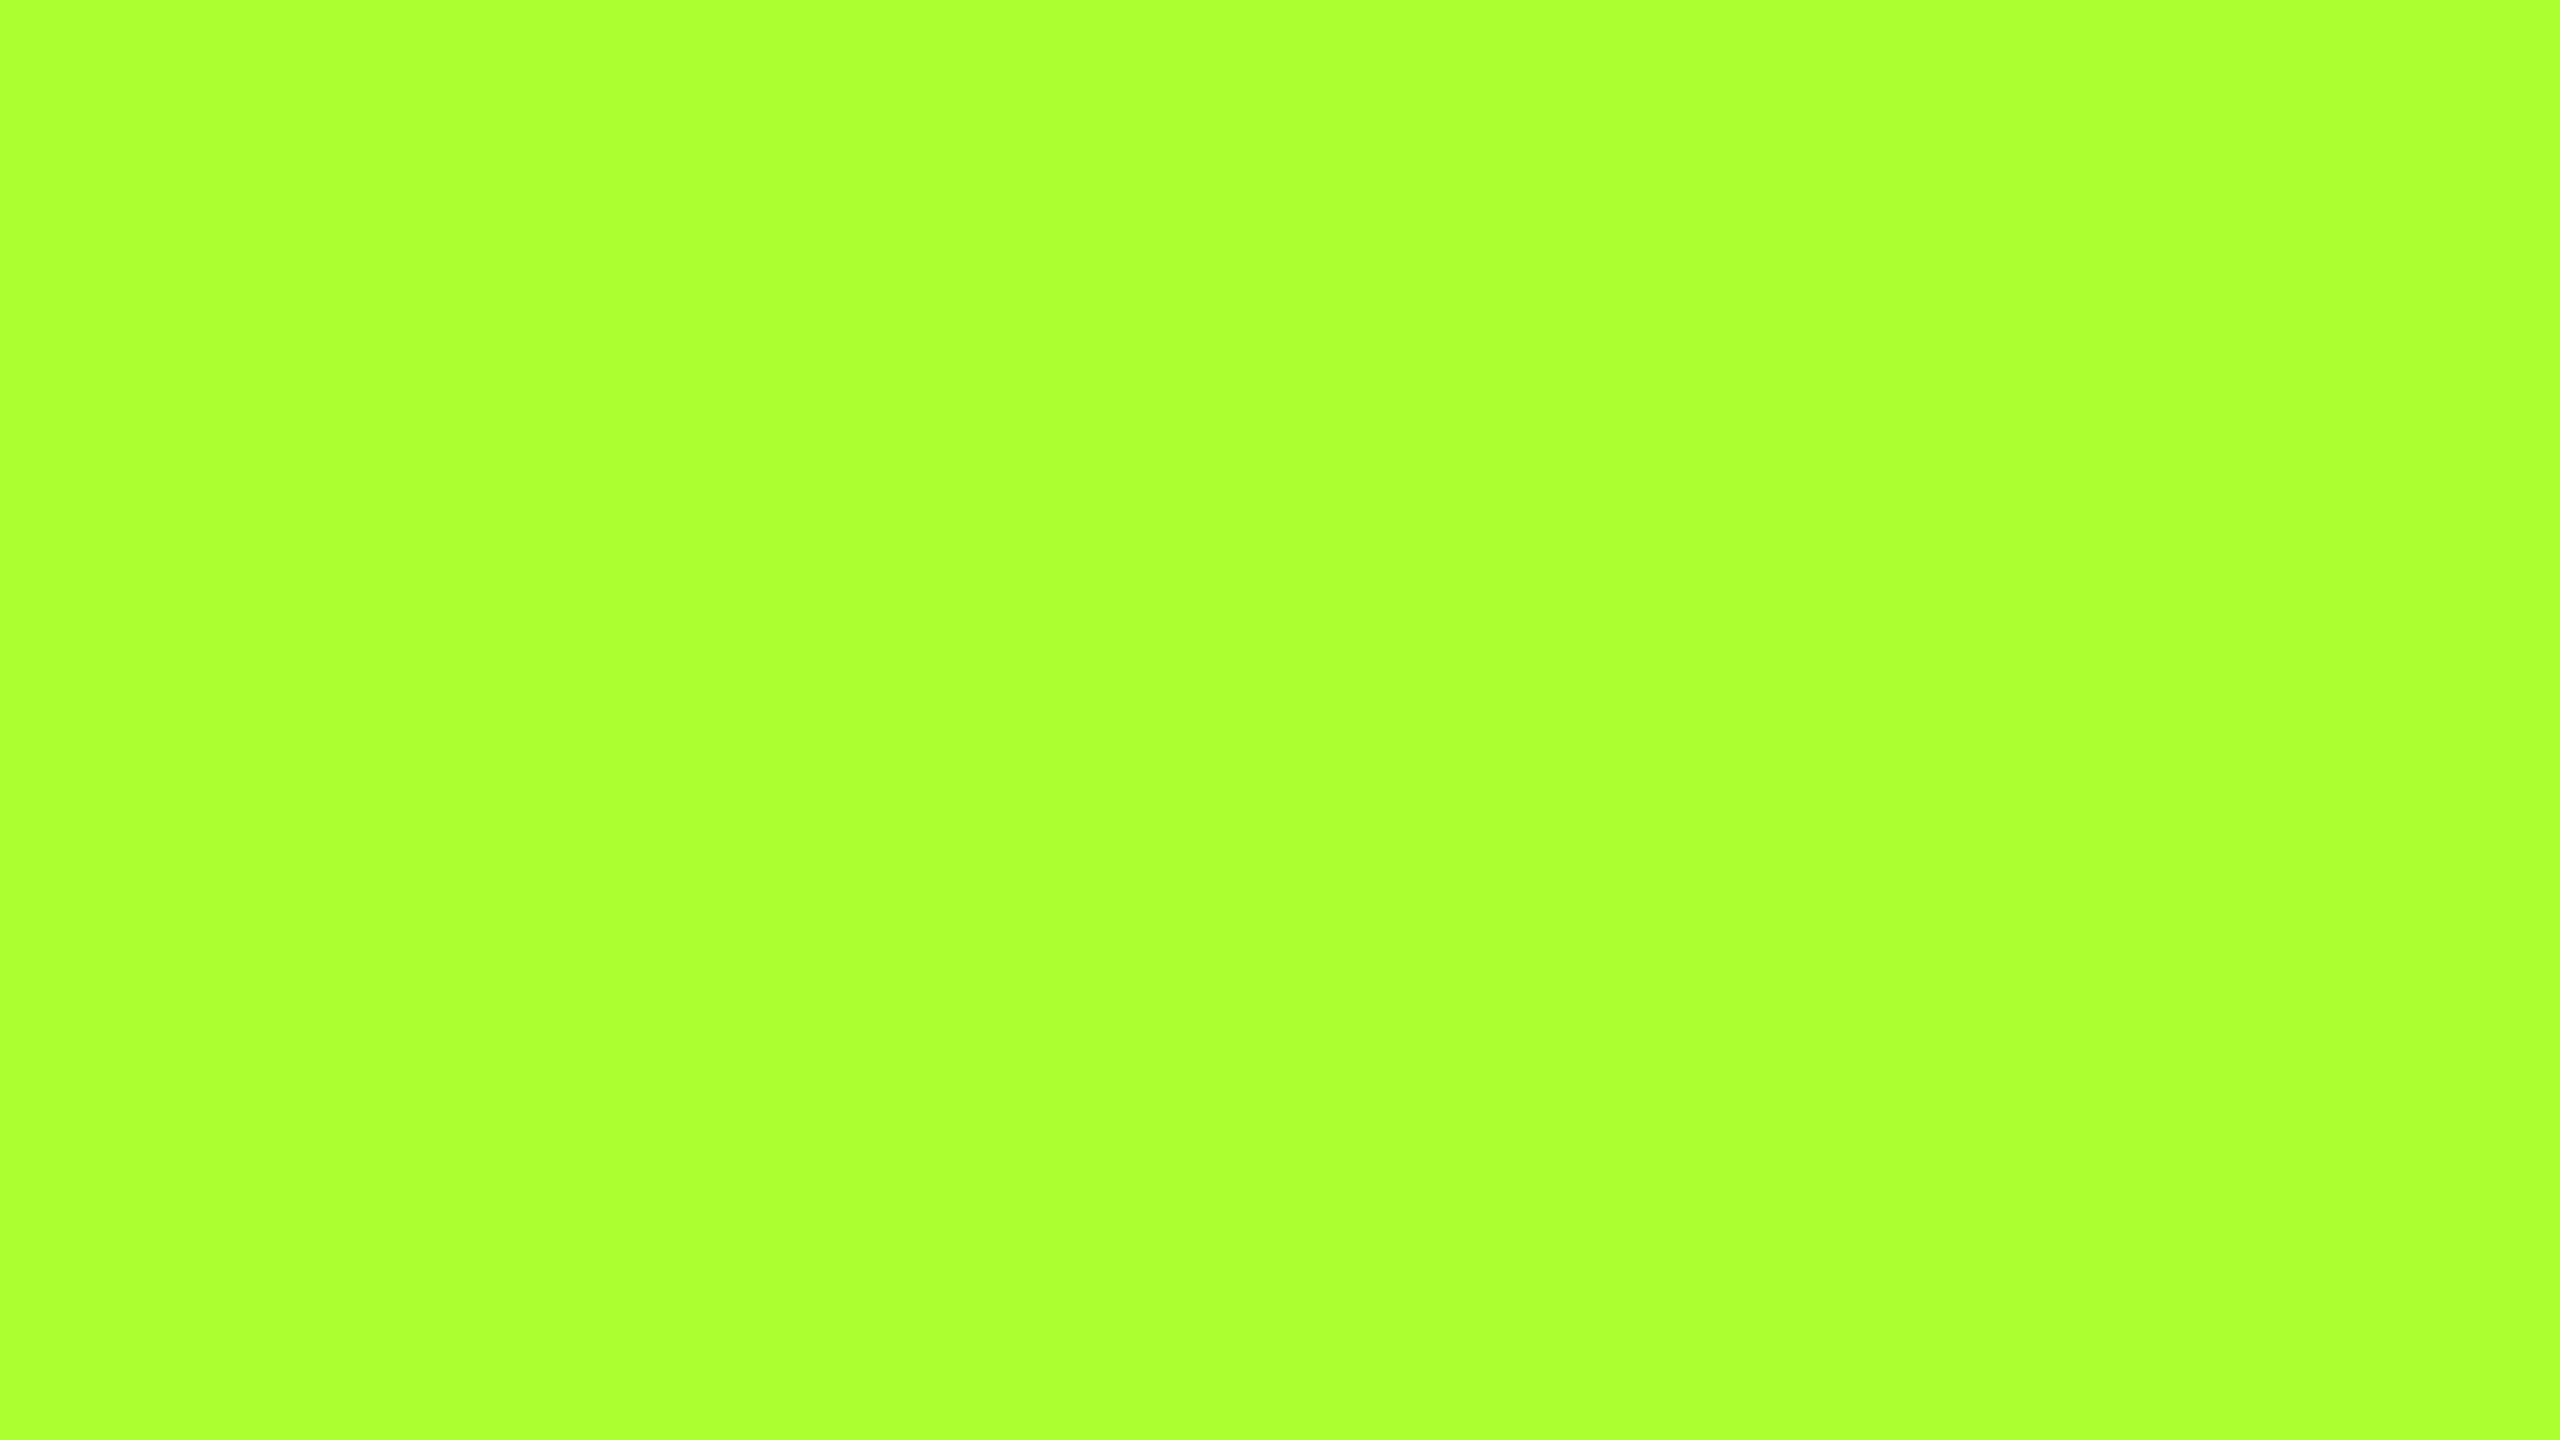 2560x1440 Green-yellow Solid Color Background